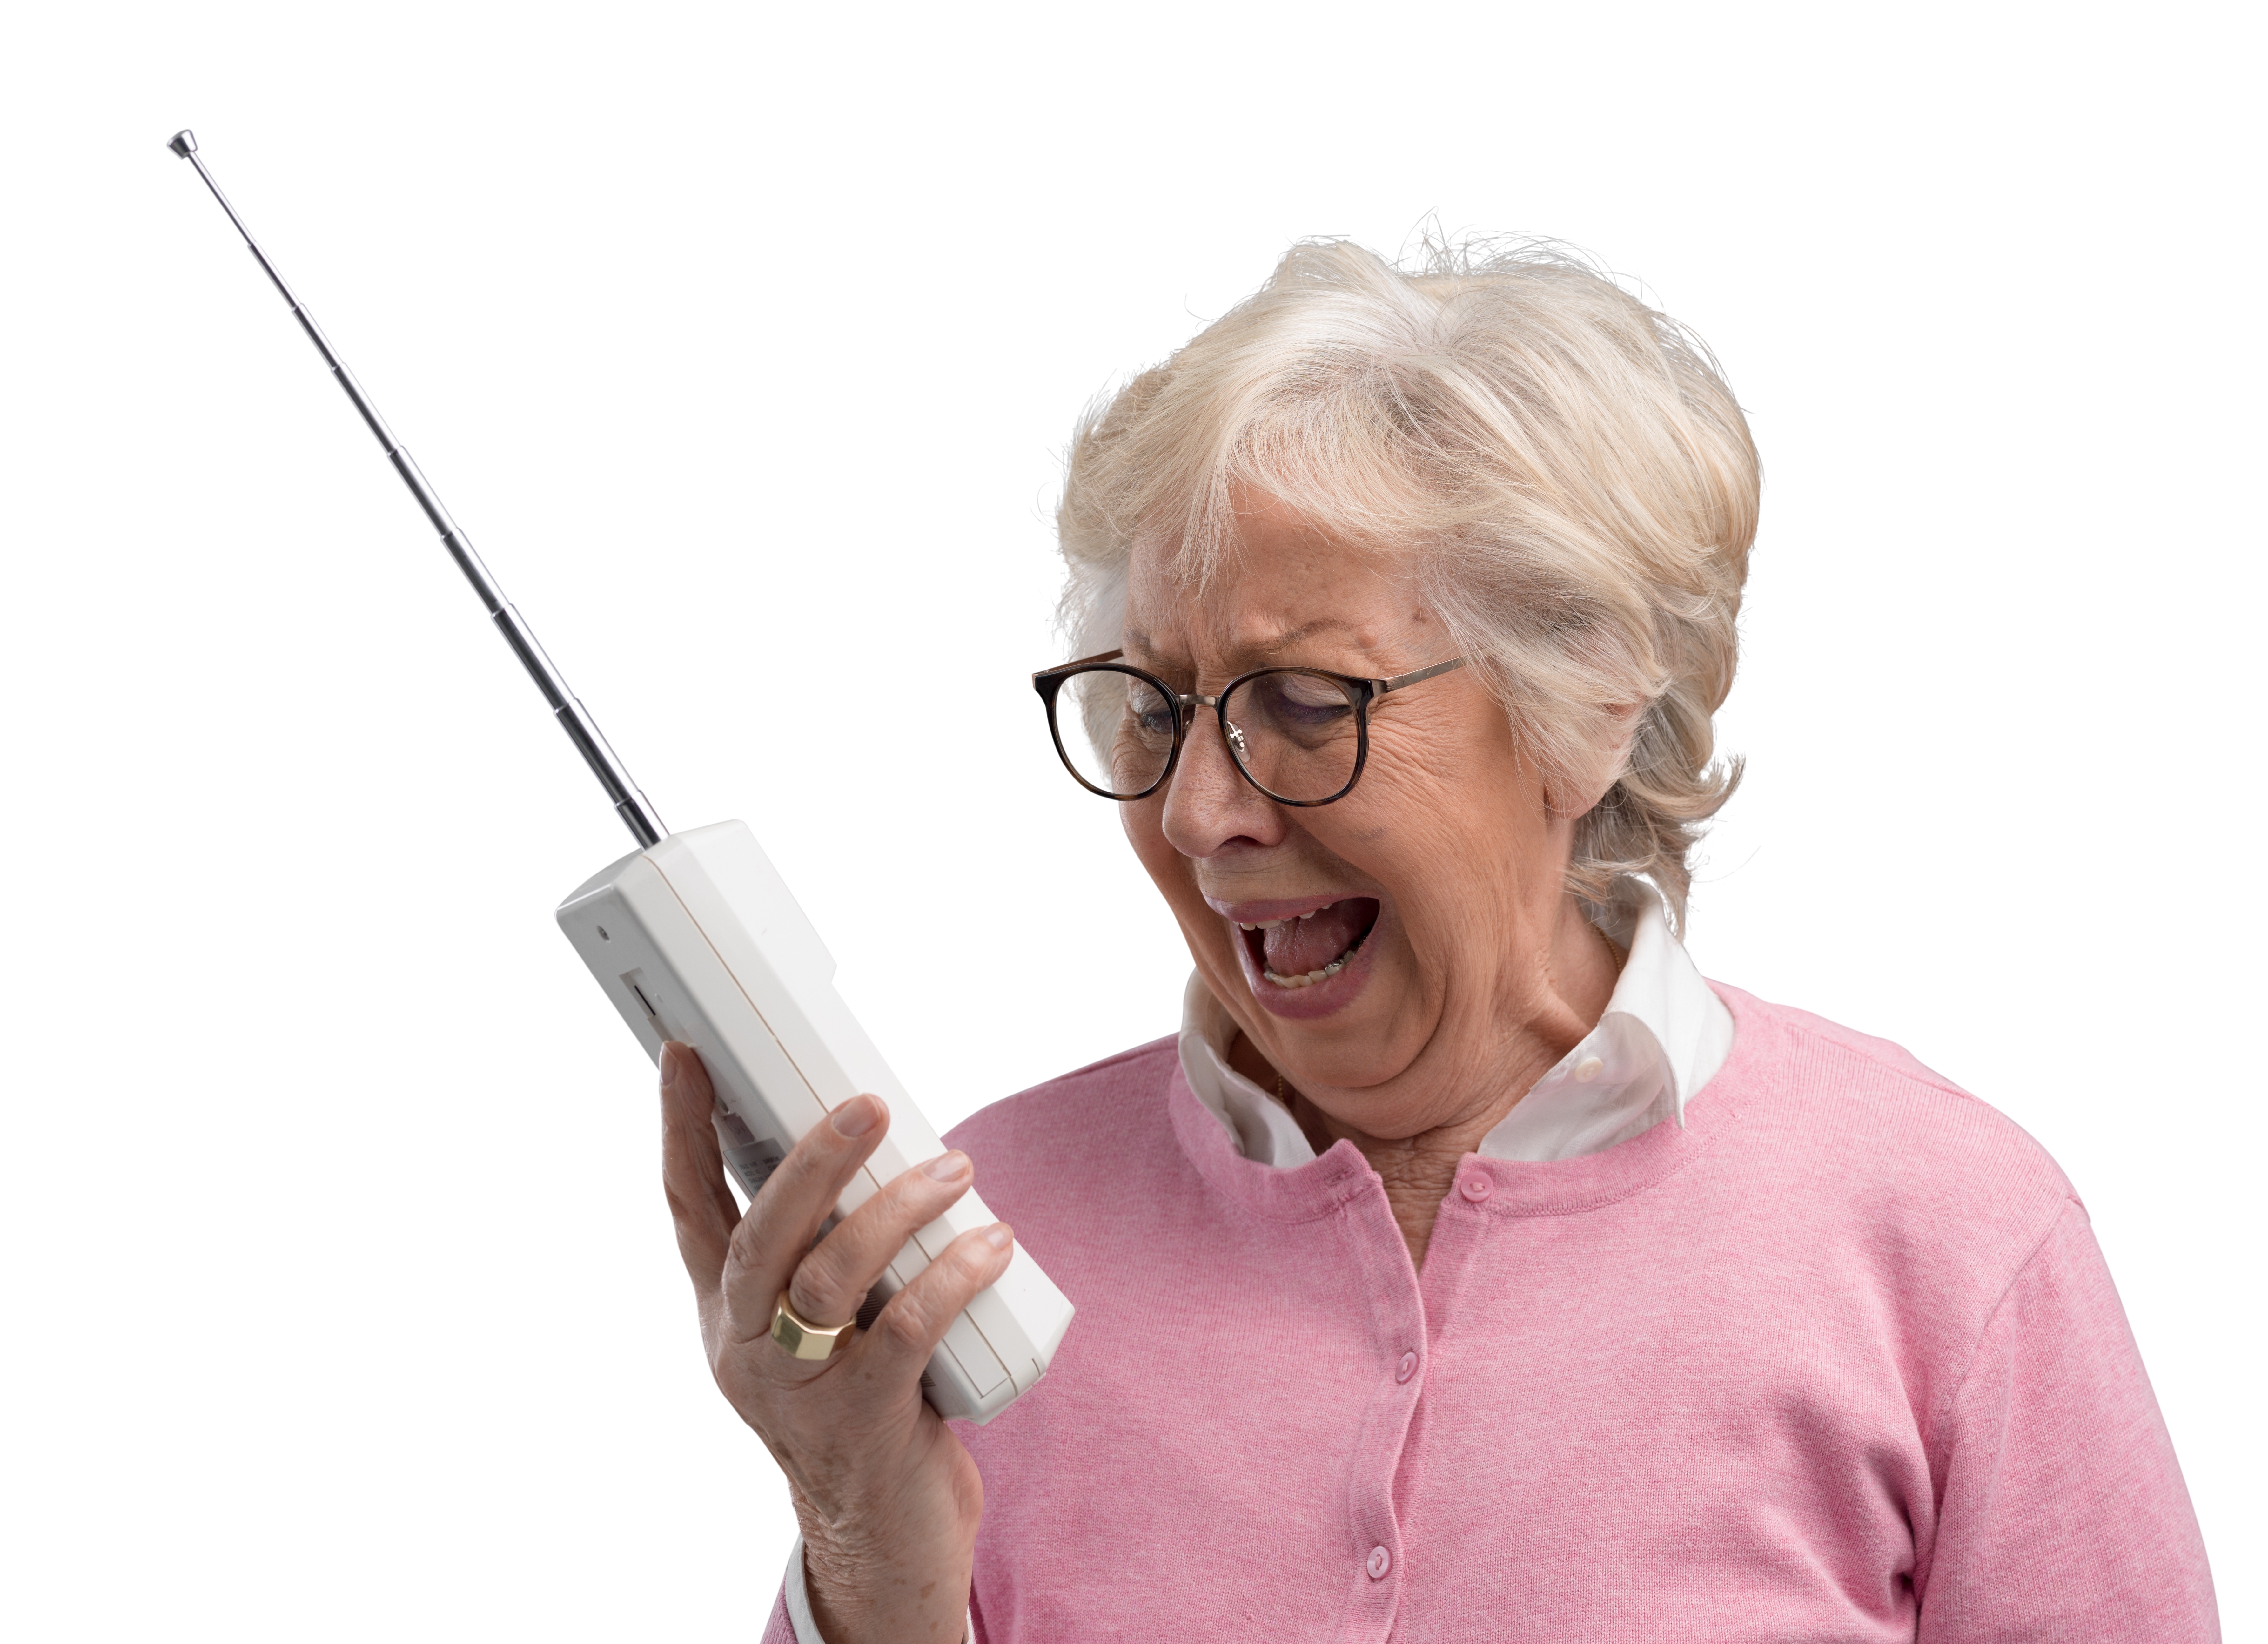 A frustrated senior woman using an old cordless phone | Source: Shutterstock